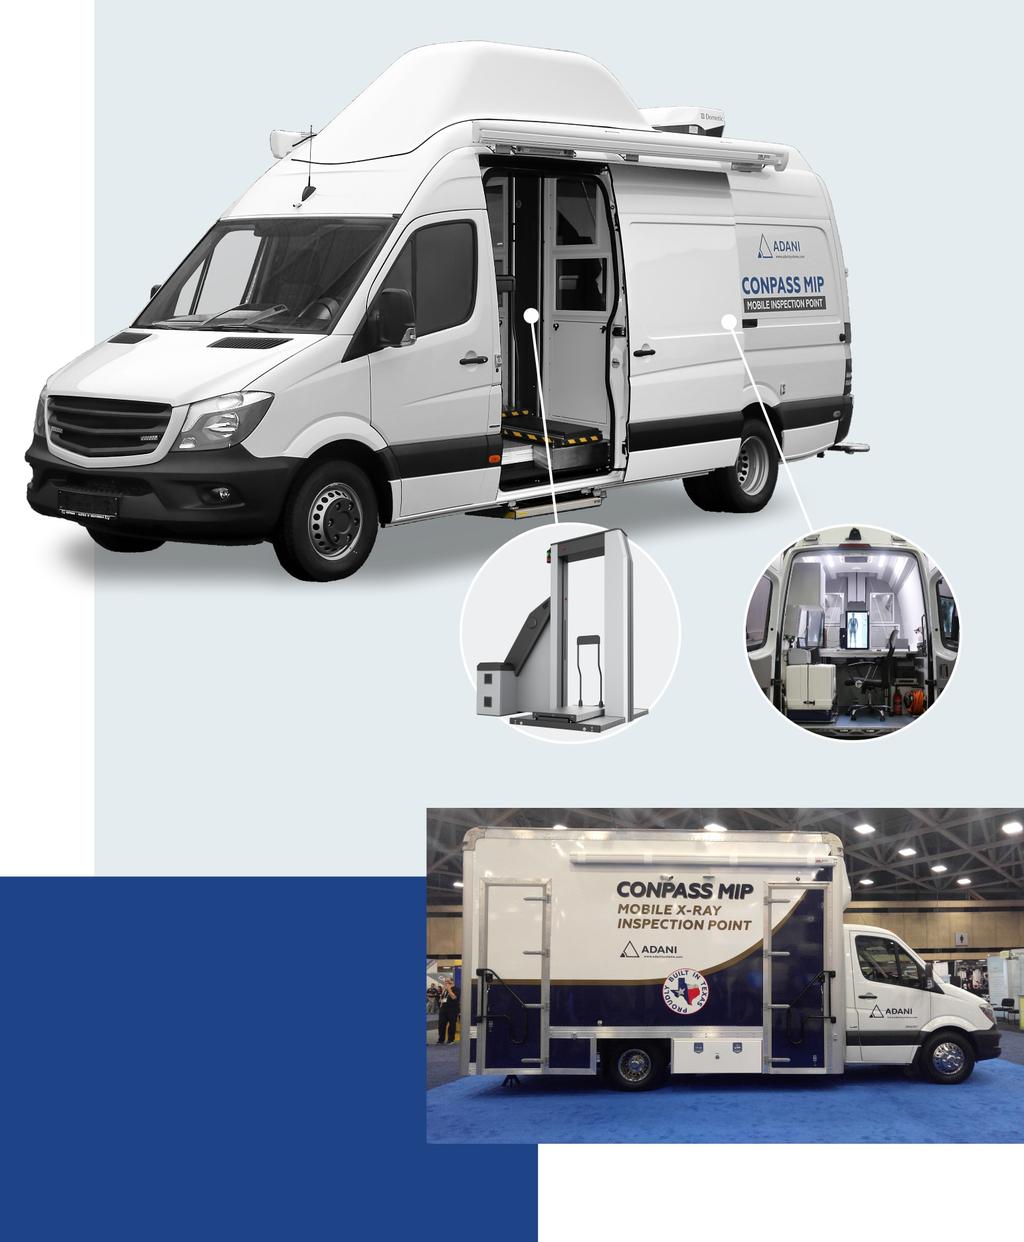 4 5 CONPASS MIP WE BRING THE EXCELLENCE OF CONPASS TO ANY DESIRED LOCATION Full Body Scanner FEATURES: Highest radiation safety inside and outside the vehicle Operator controlled power doors with